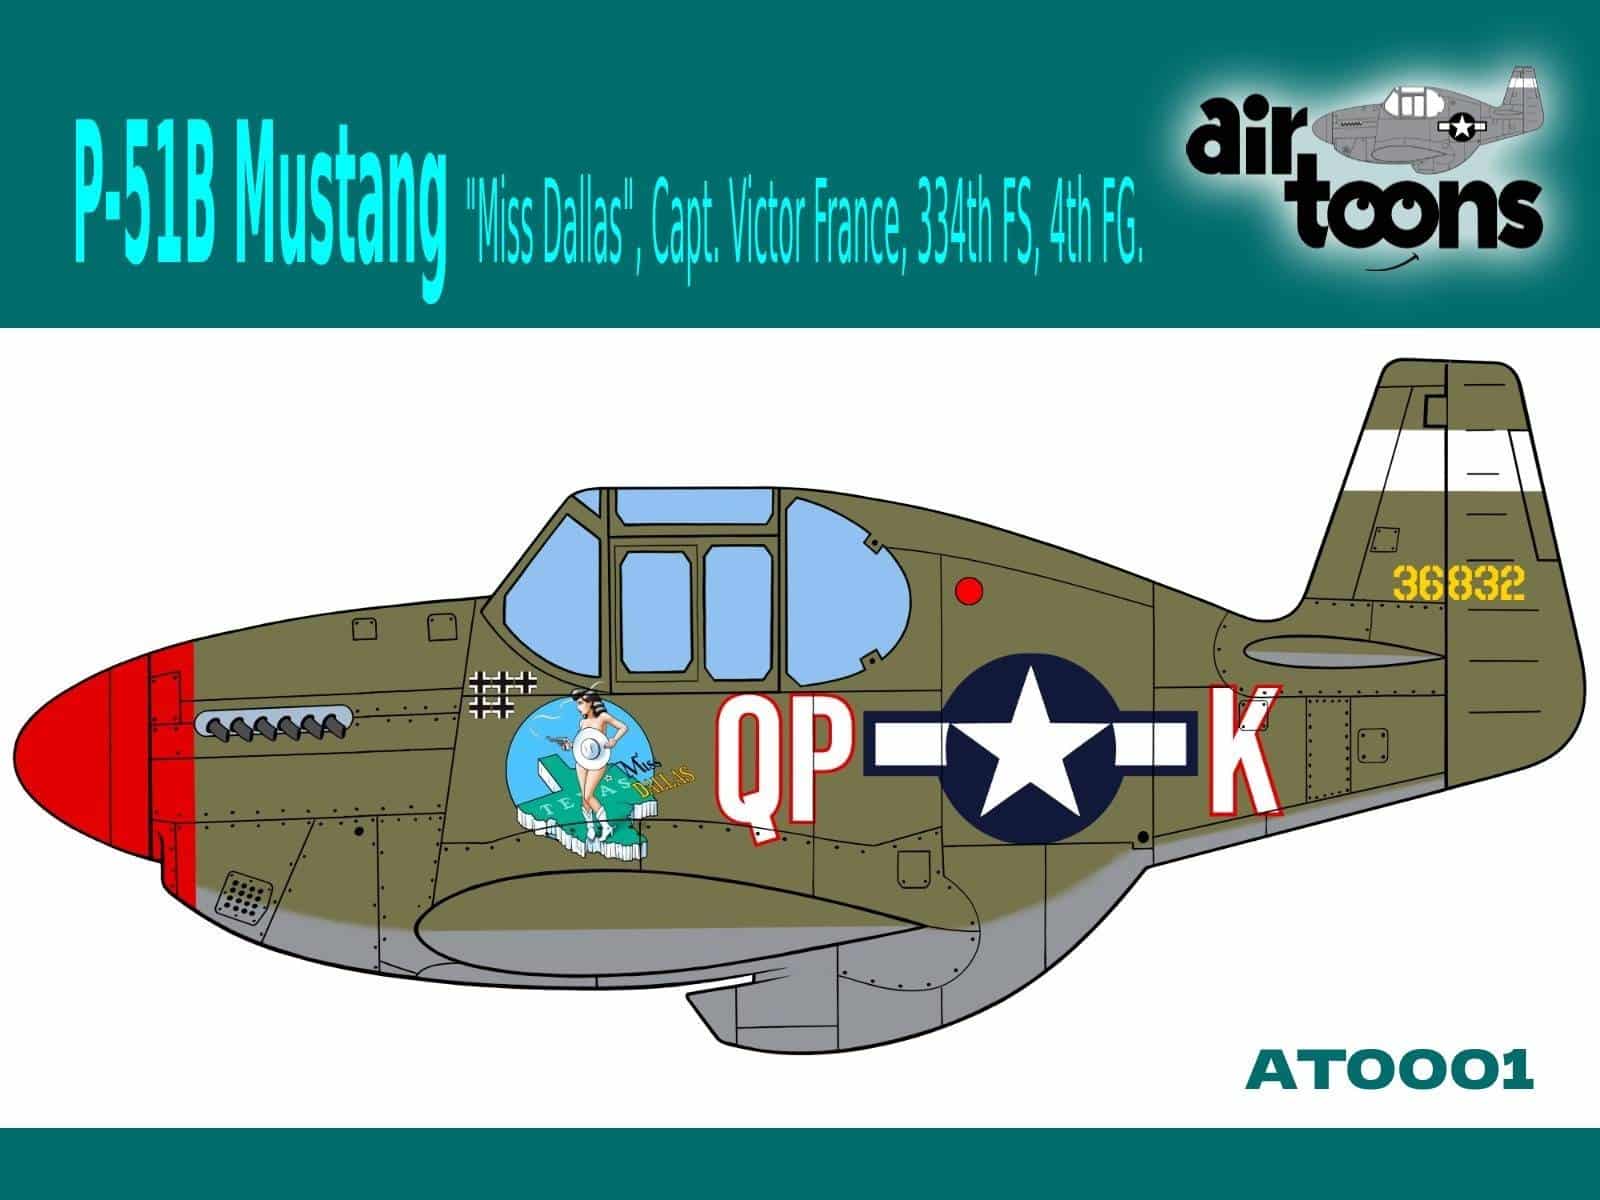 New Toon-style aircraft kits from AirToons